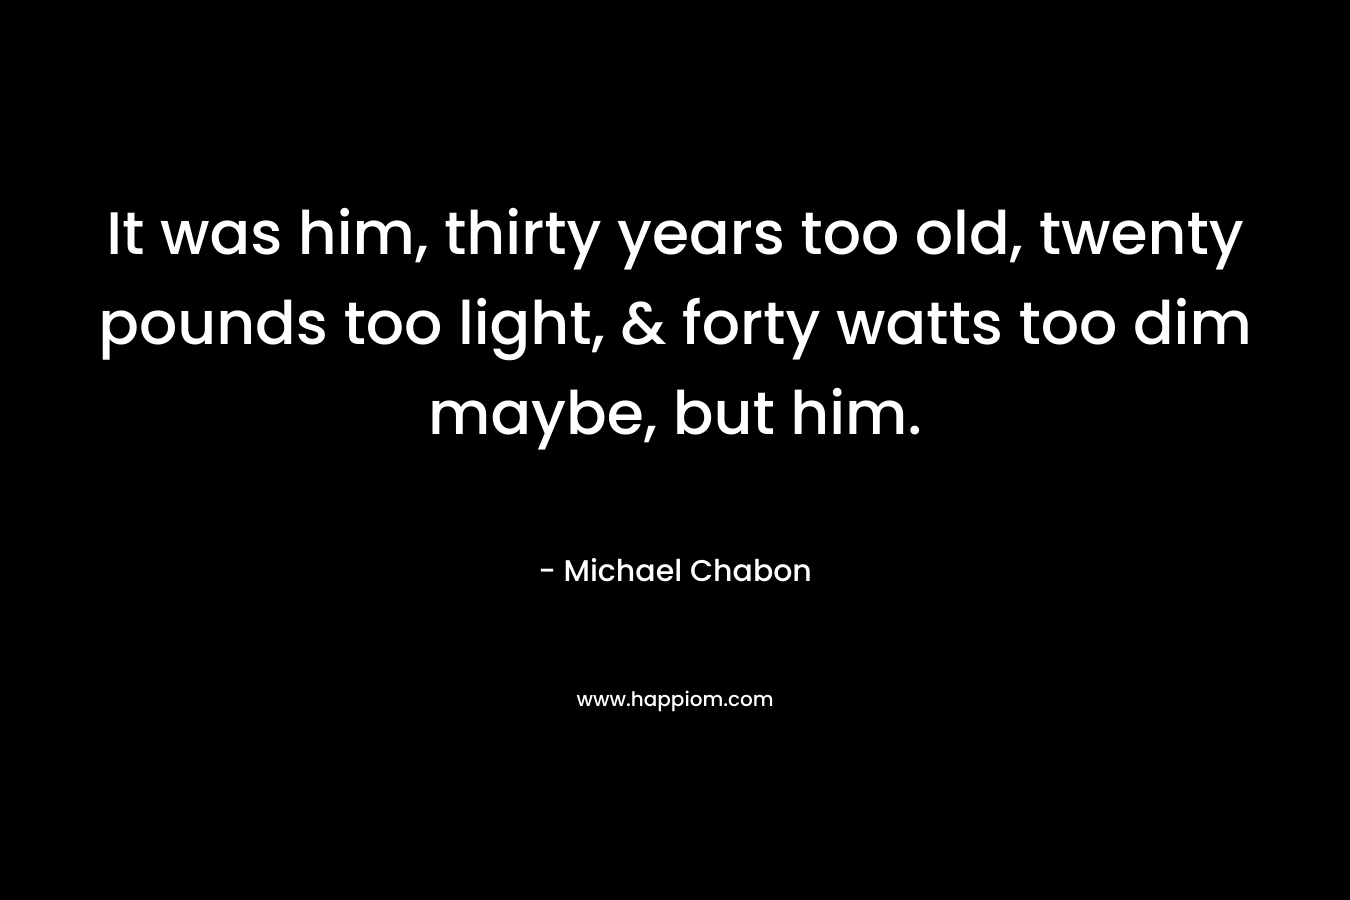 It was him, thirty years too old, twenty pounds too light, & forty watts too dim maybe, but him. – Michael Chabon